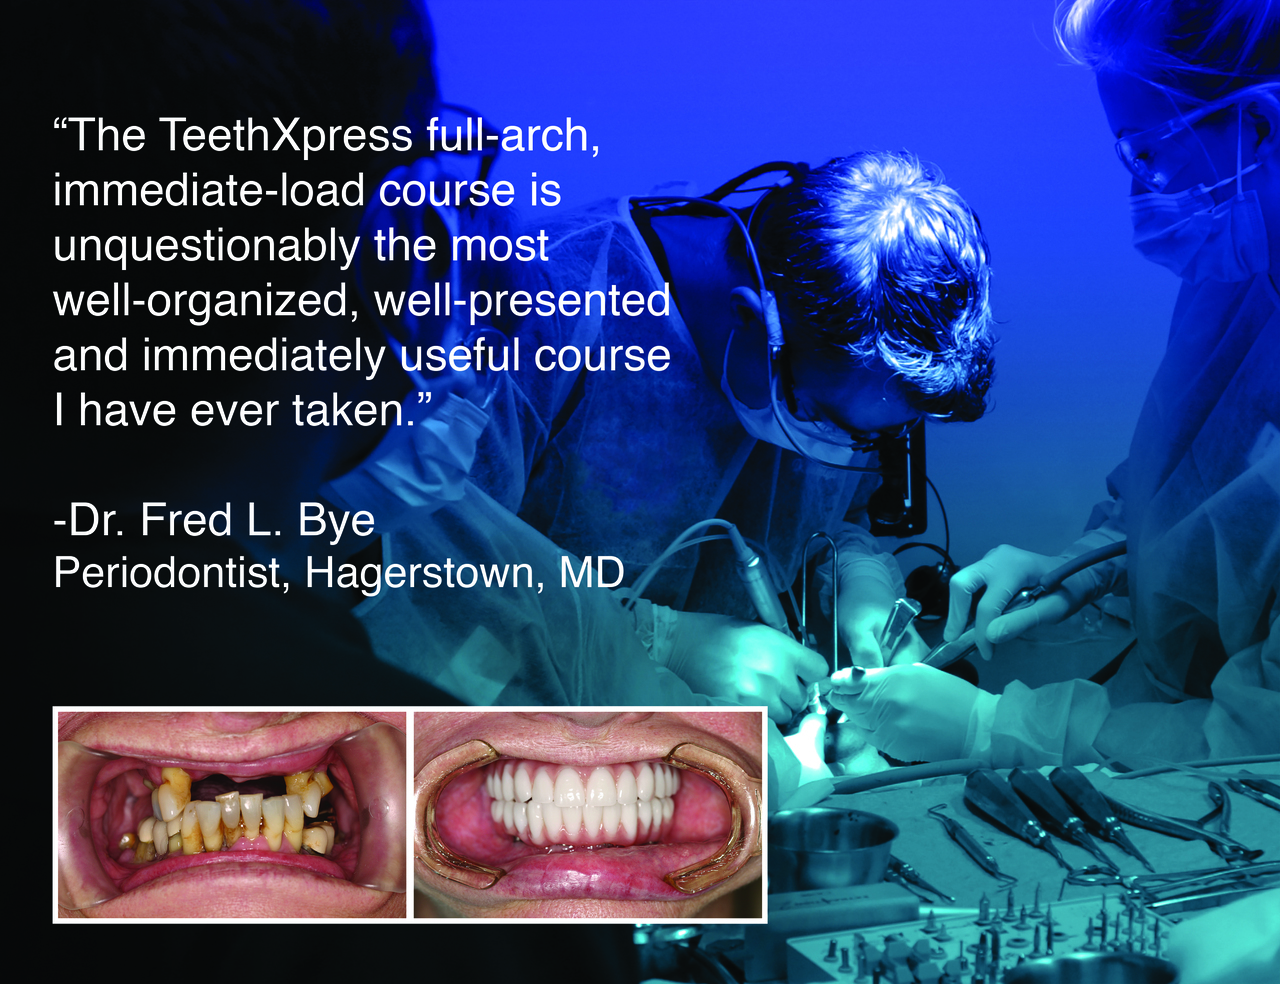 The TeethXpress full-arch, immediate-load course is unquestionably the most well-organized, well-presented and immediately useful course I have ever taken.